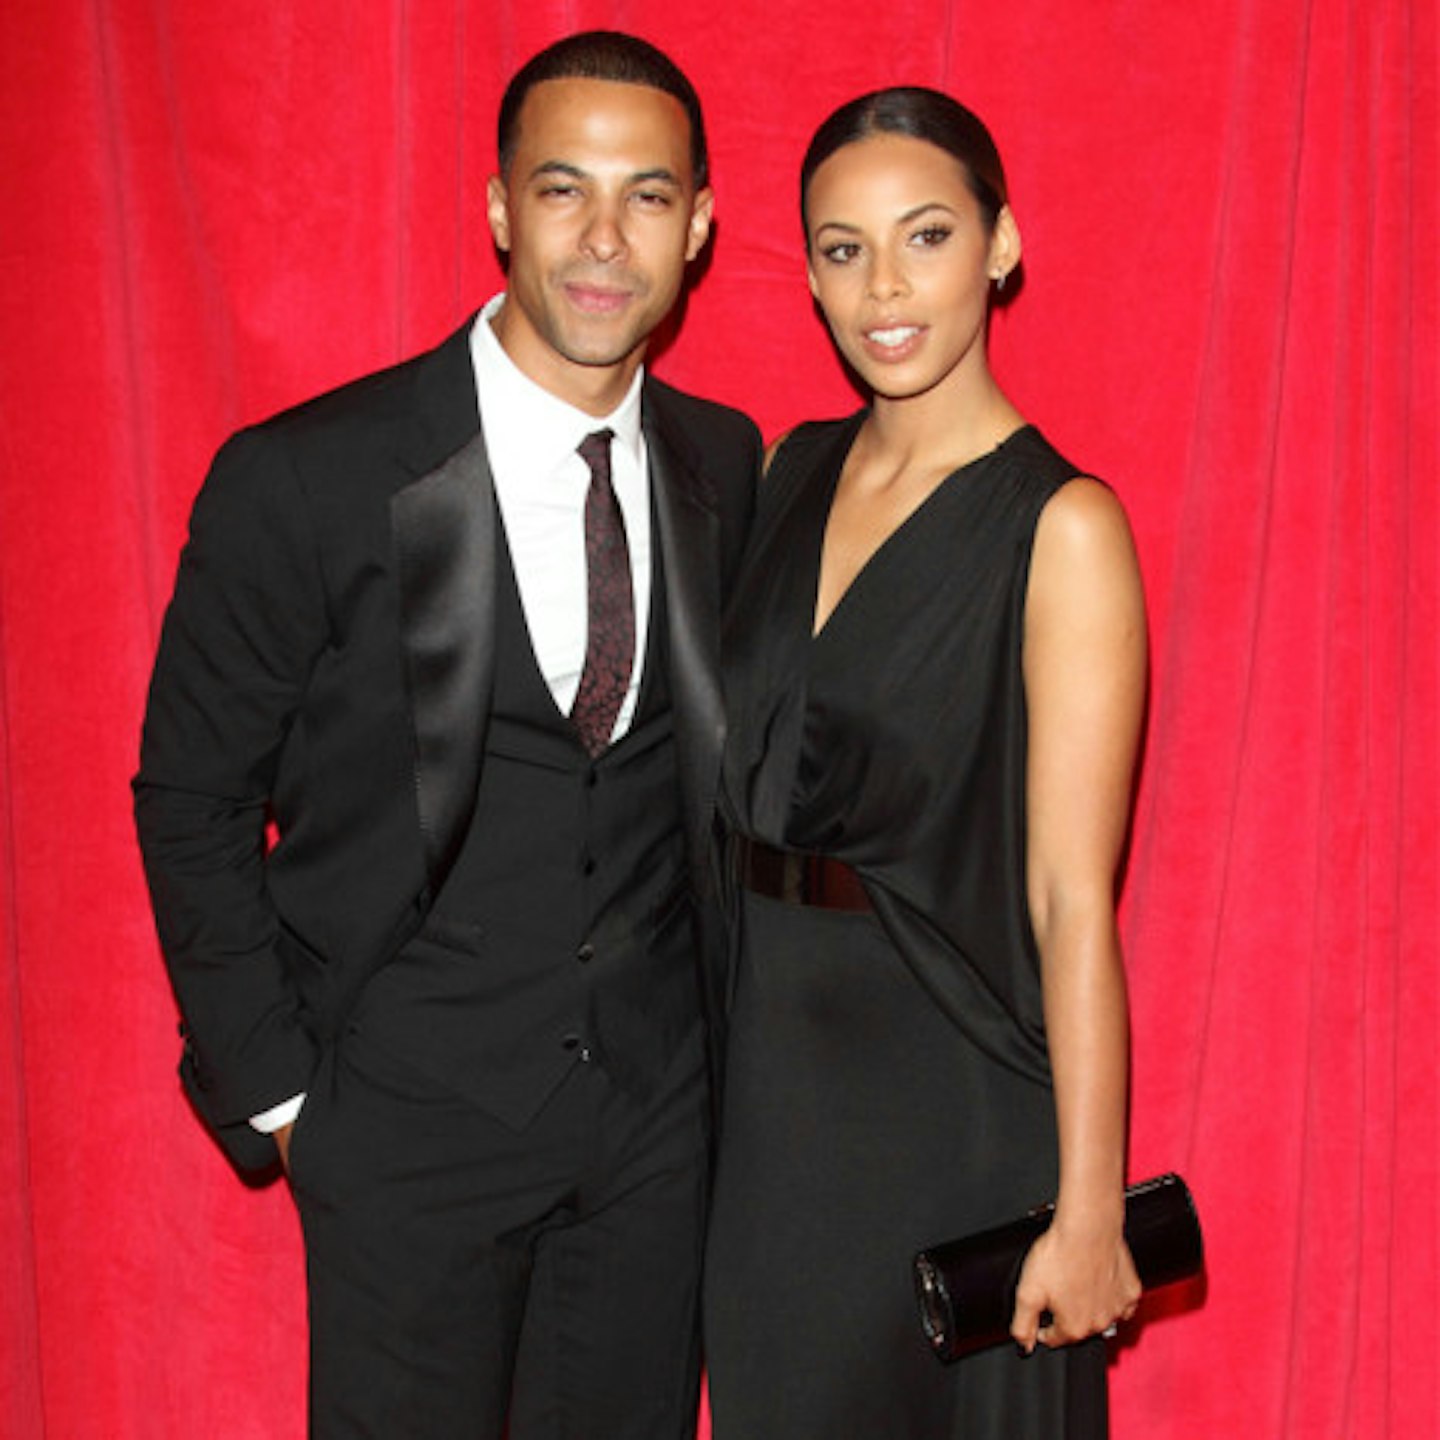 Marvin and Rochelle welcomed the first JLS baby last year, their daughter Alaia-Mai